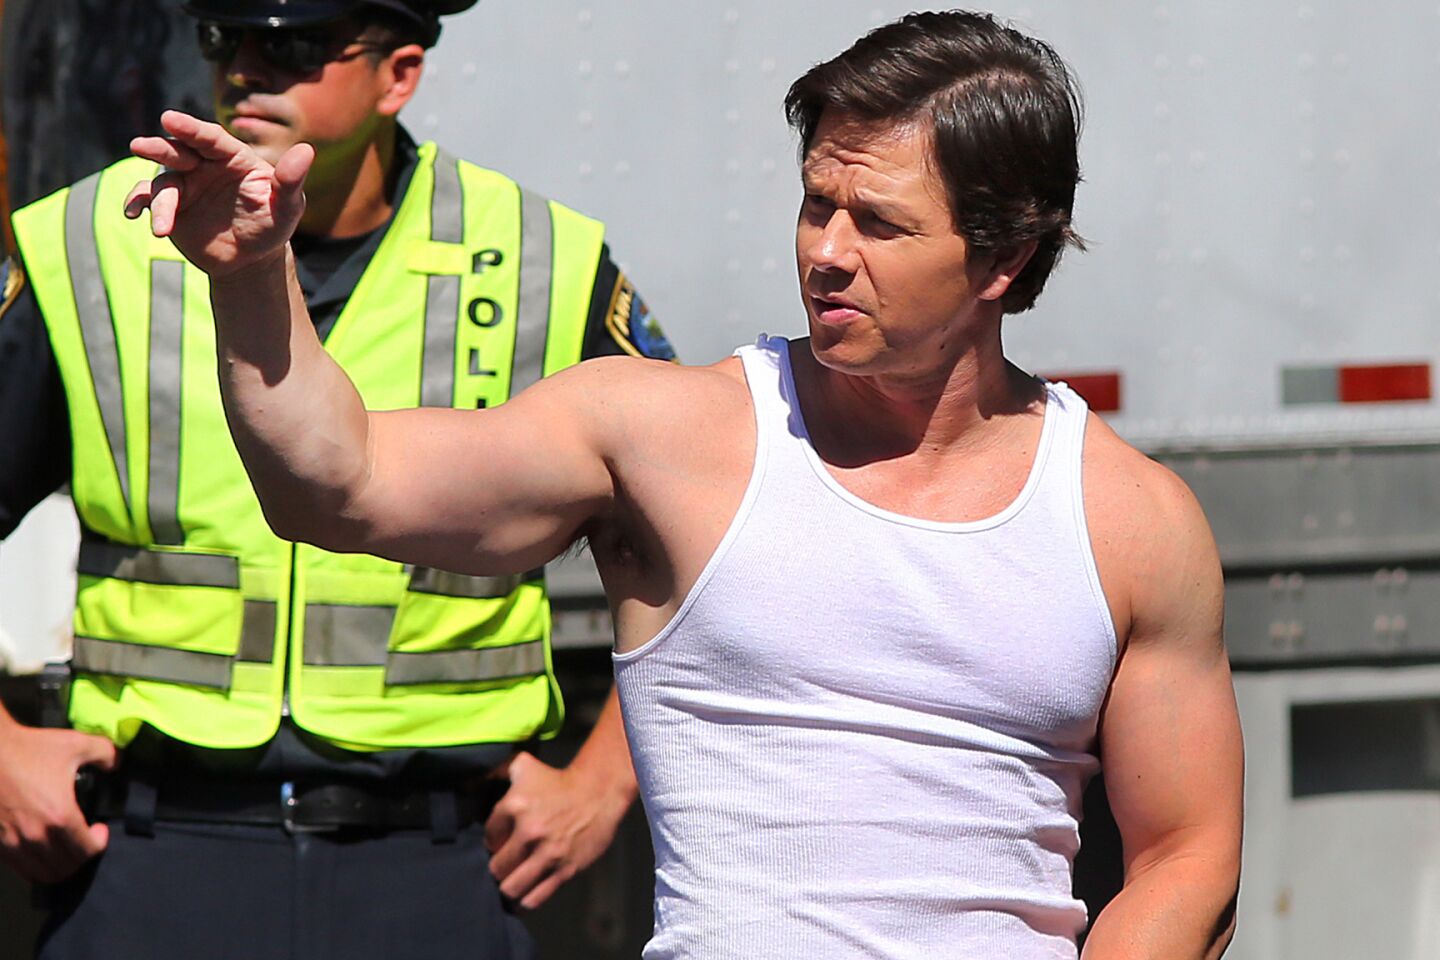 On the set: Movies and TV | Mark Wahlberg